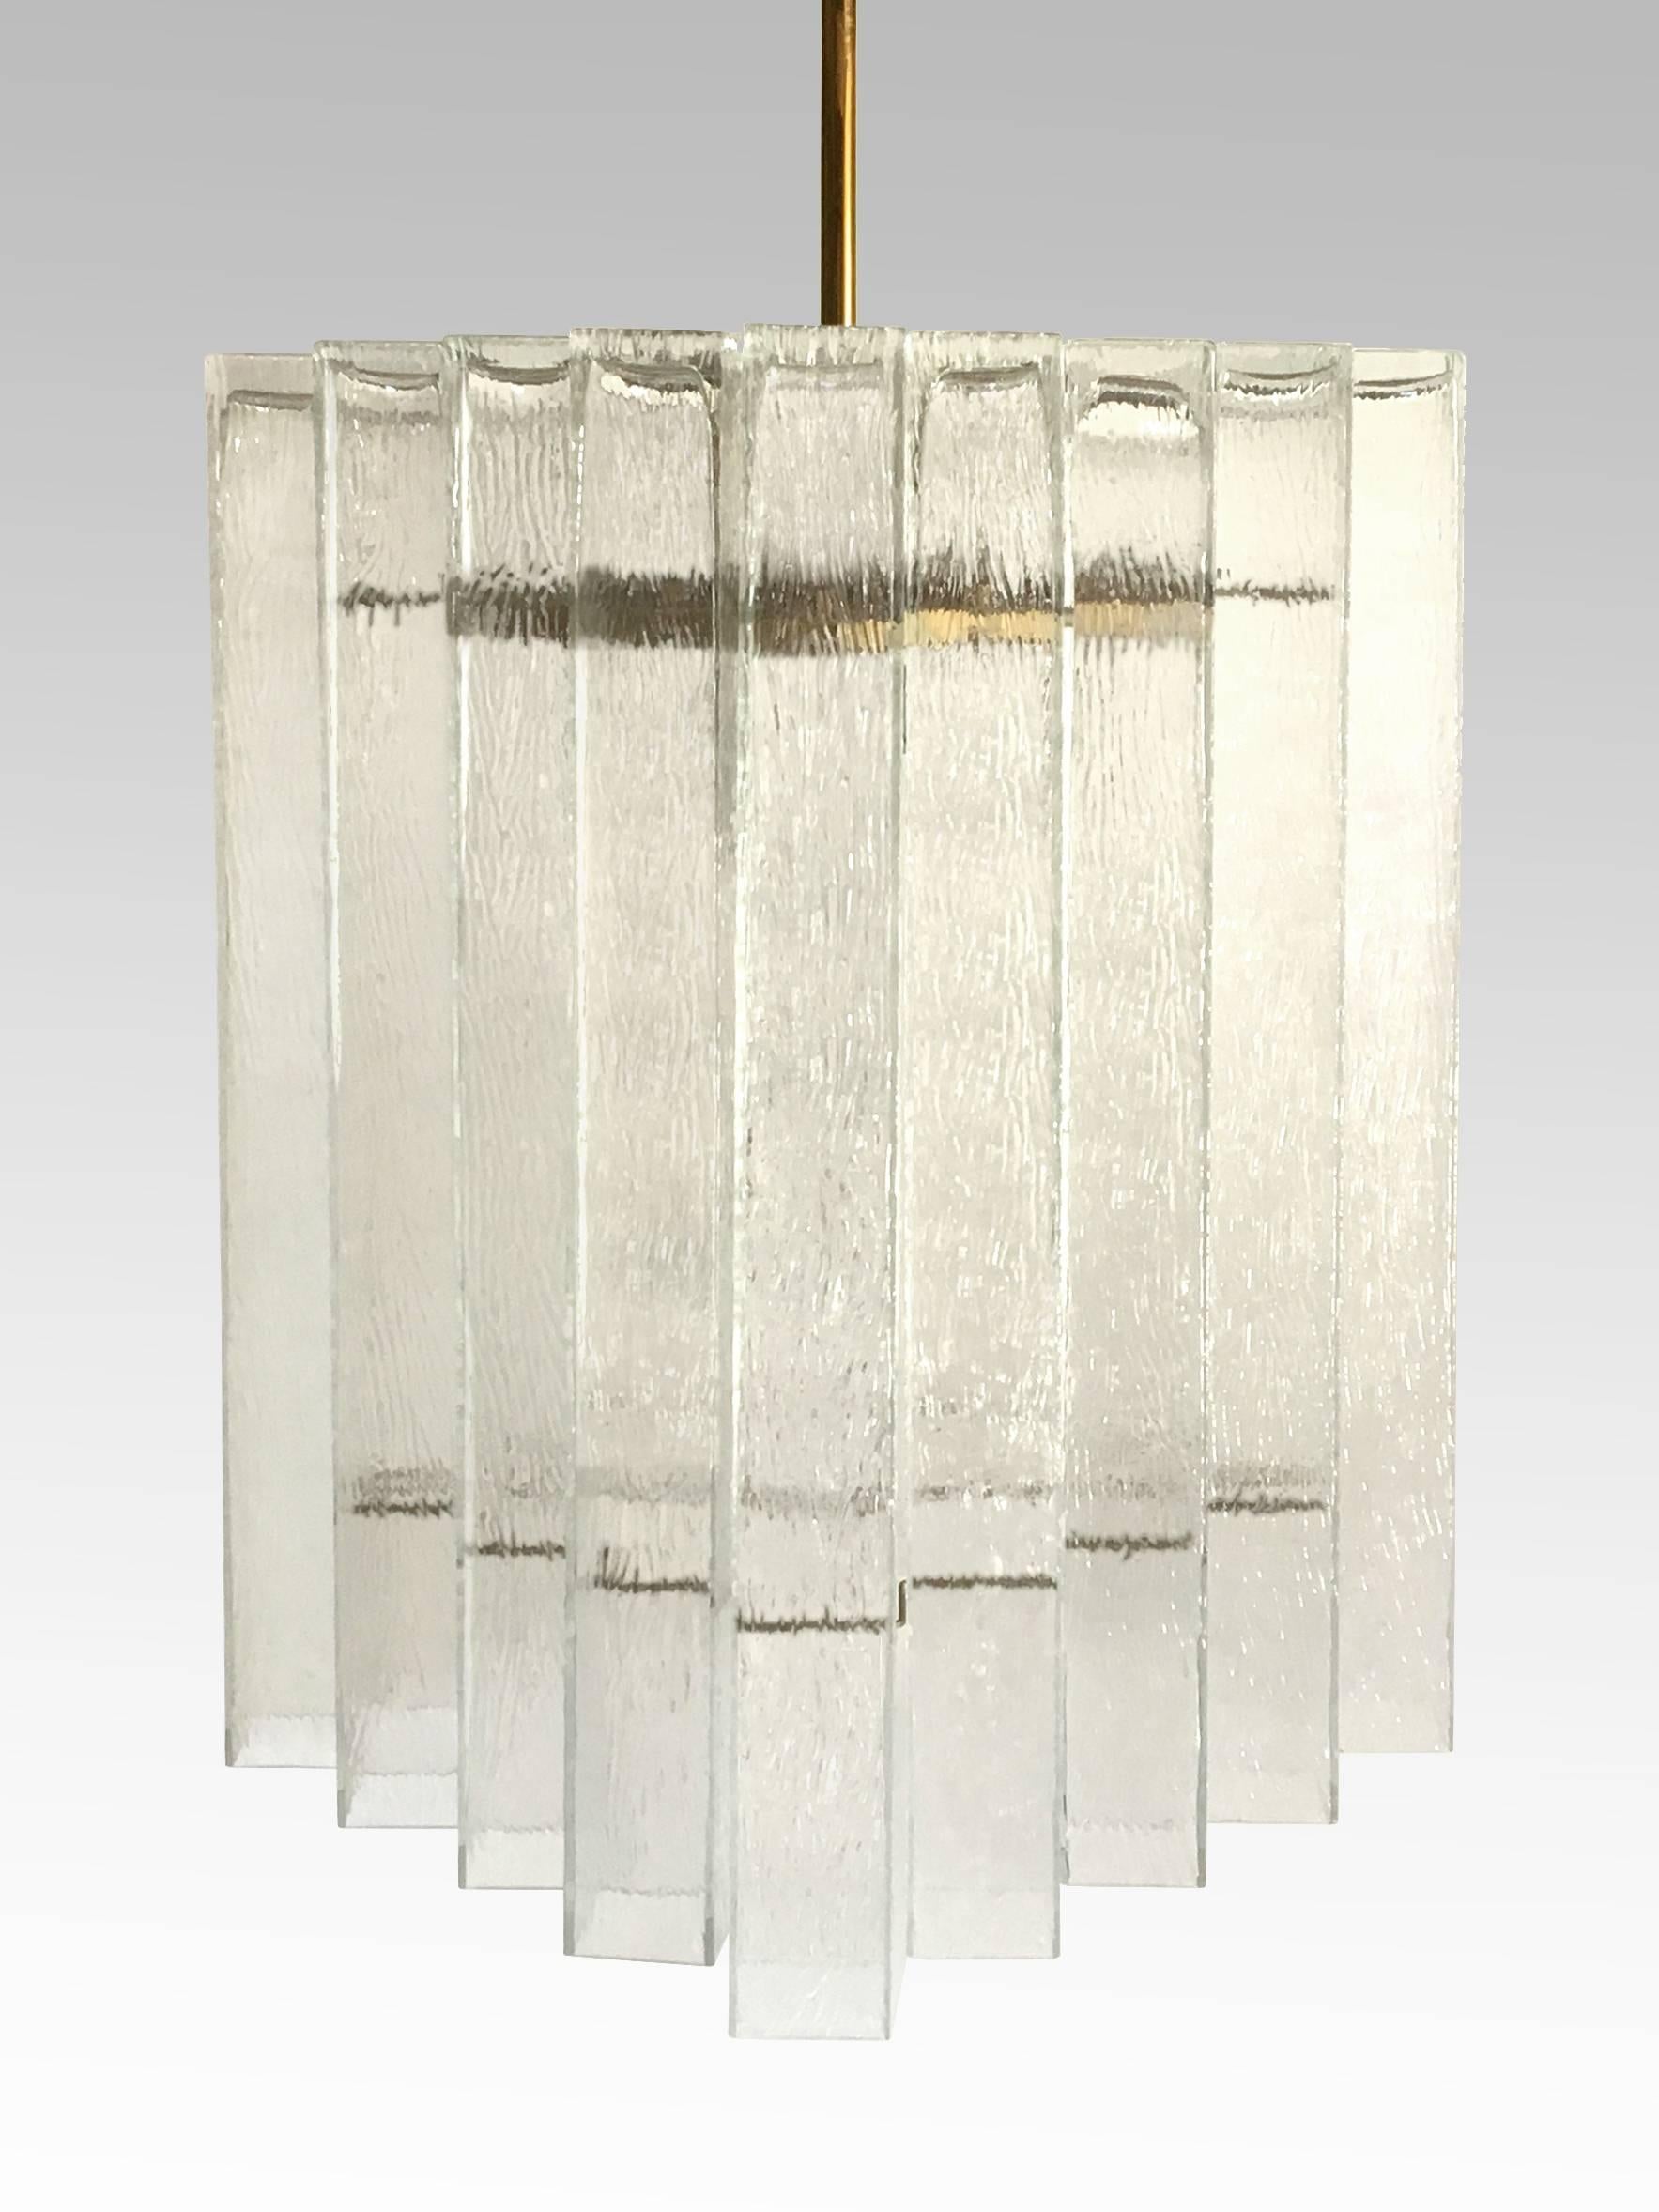 A chandelier consisting of multiple rectangular textured glass hung on a brass frame by Doria Leuchten, German, 1960s (two available).